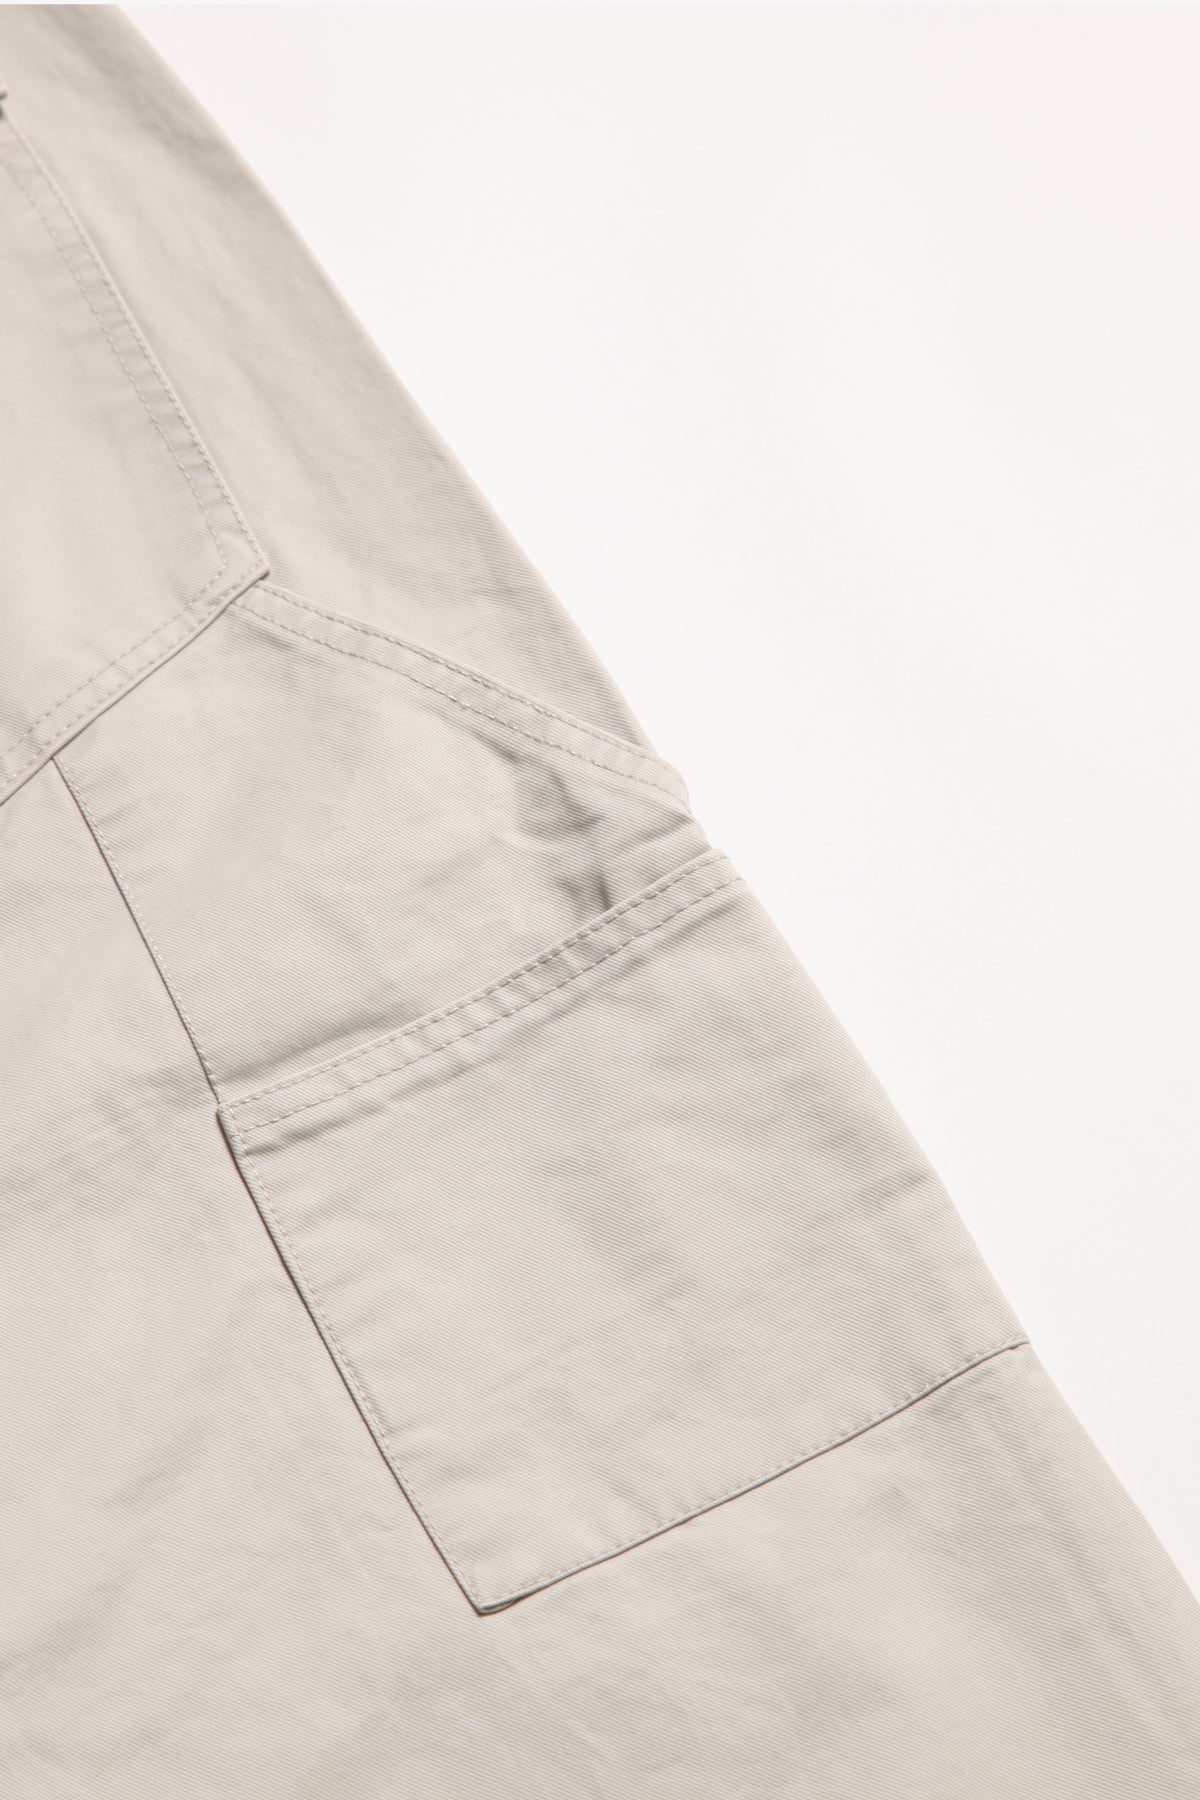 Blacksmith - Sowing Field Pants - Stone